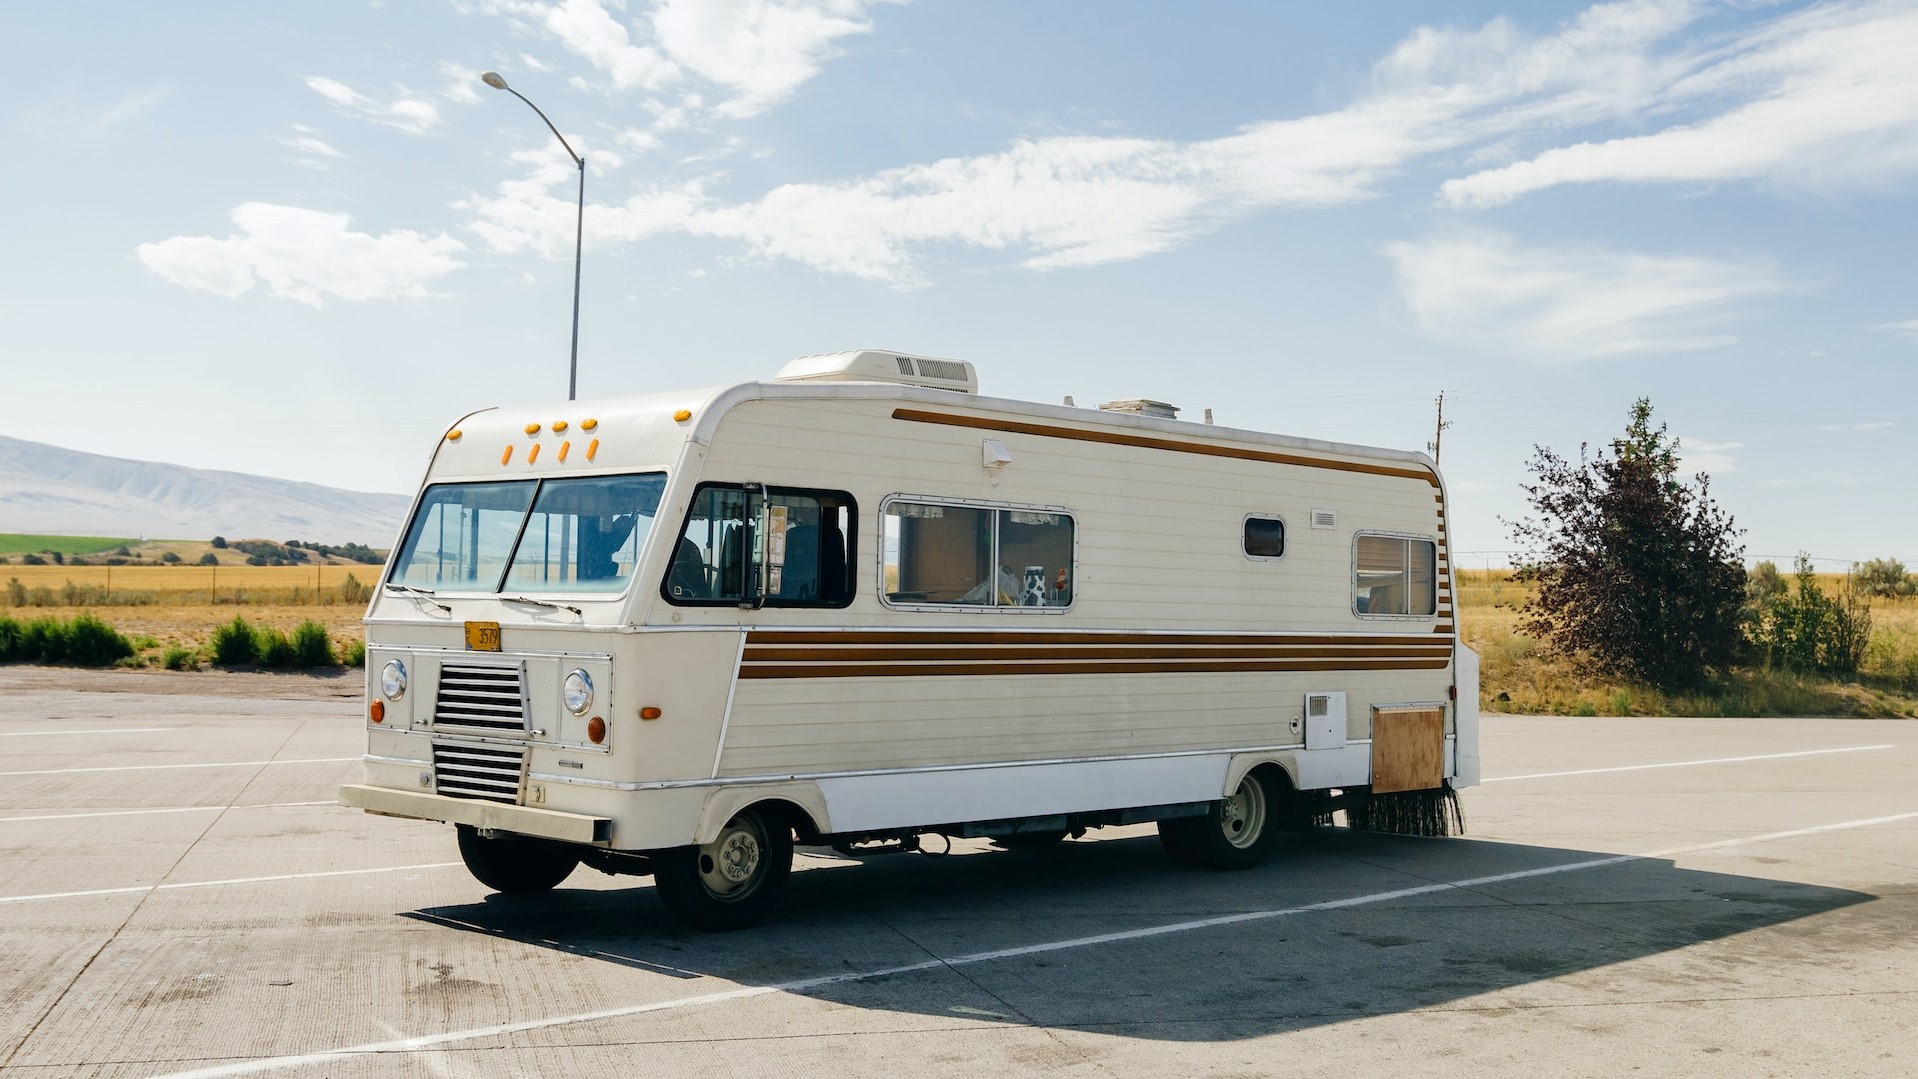 Vintage RV on road trip | Goodwill Car Donations